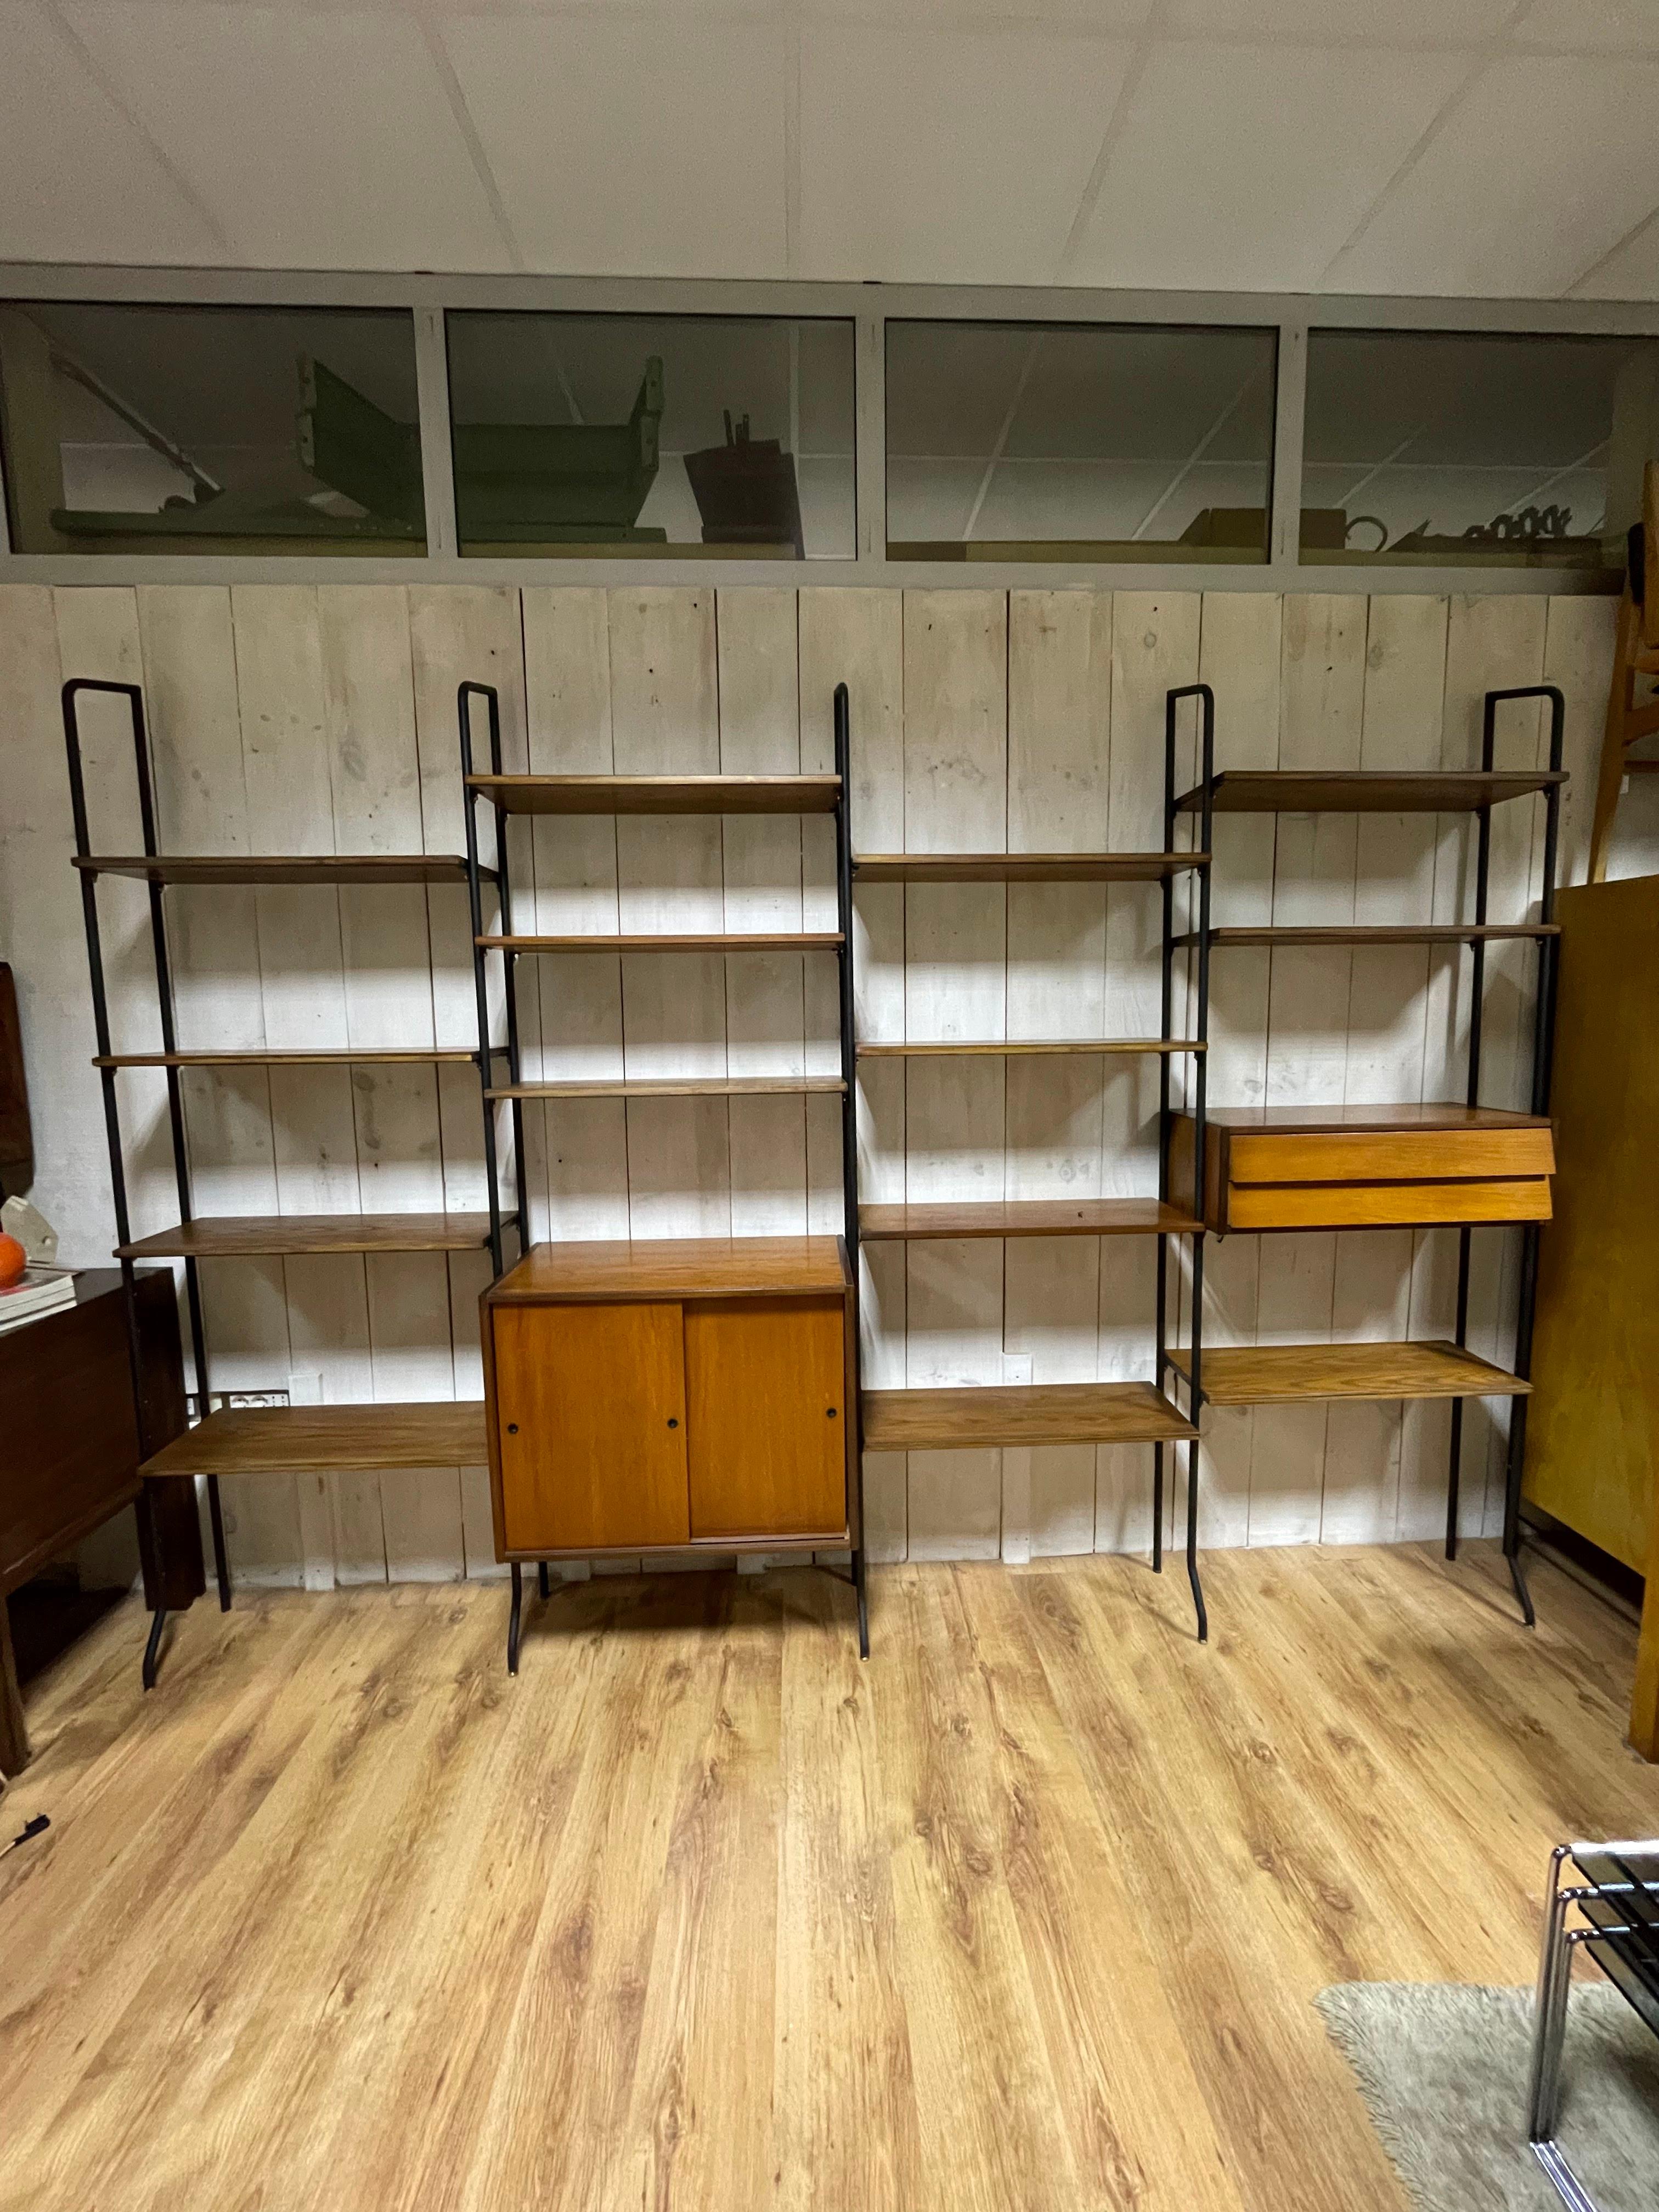 1950s Bookcase by Studio Amma Turin.
It is made up of 4 spans with iron uprights with brass feet, 14 shelves, a closed container space with sliding doors and one with two drawers.
The two storage spaces can be positioned however you prefer.

The